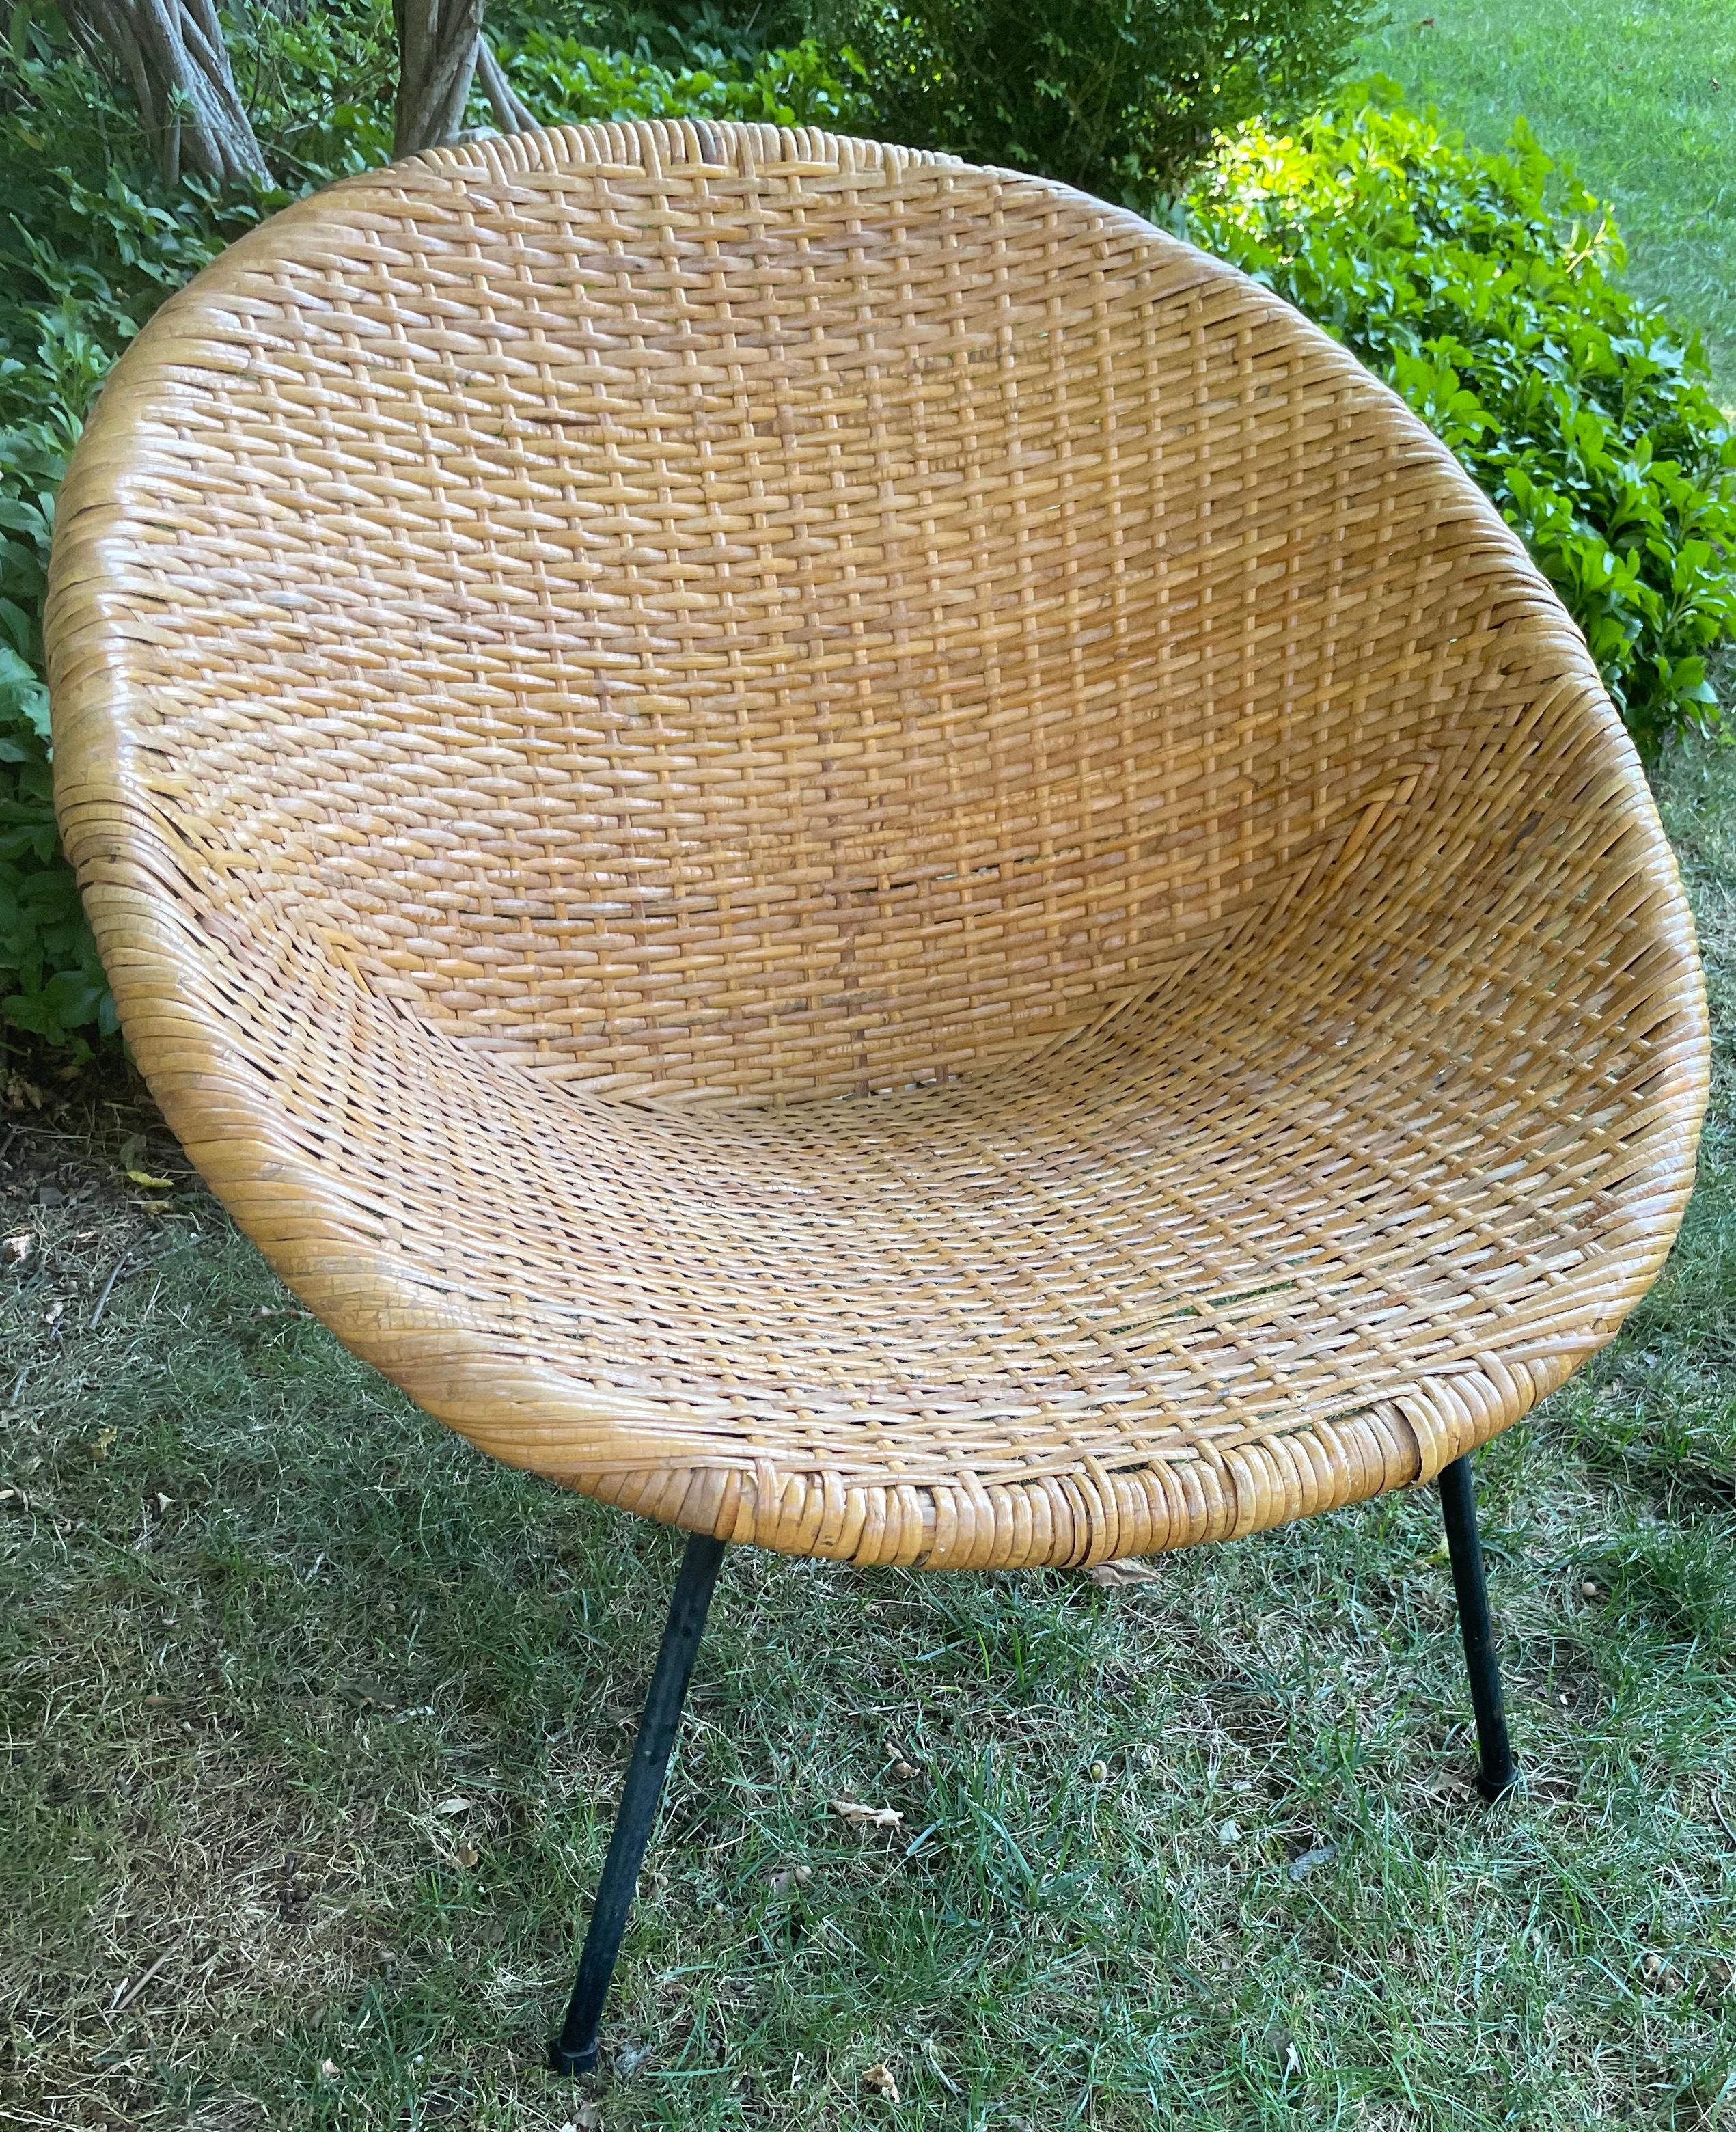 Midcentury woven wicker and bamboo bucket chair. Woven rattan and bamboo bucket chair with metal legs. United States, Mid 20th Century. 
Dimensions: 30” W x 30” D x 26.5